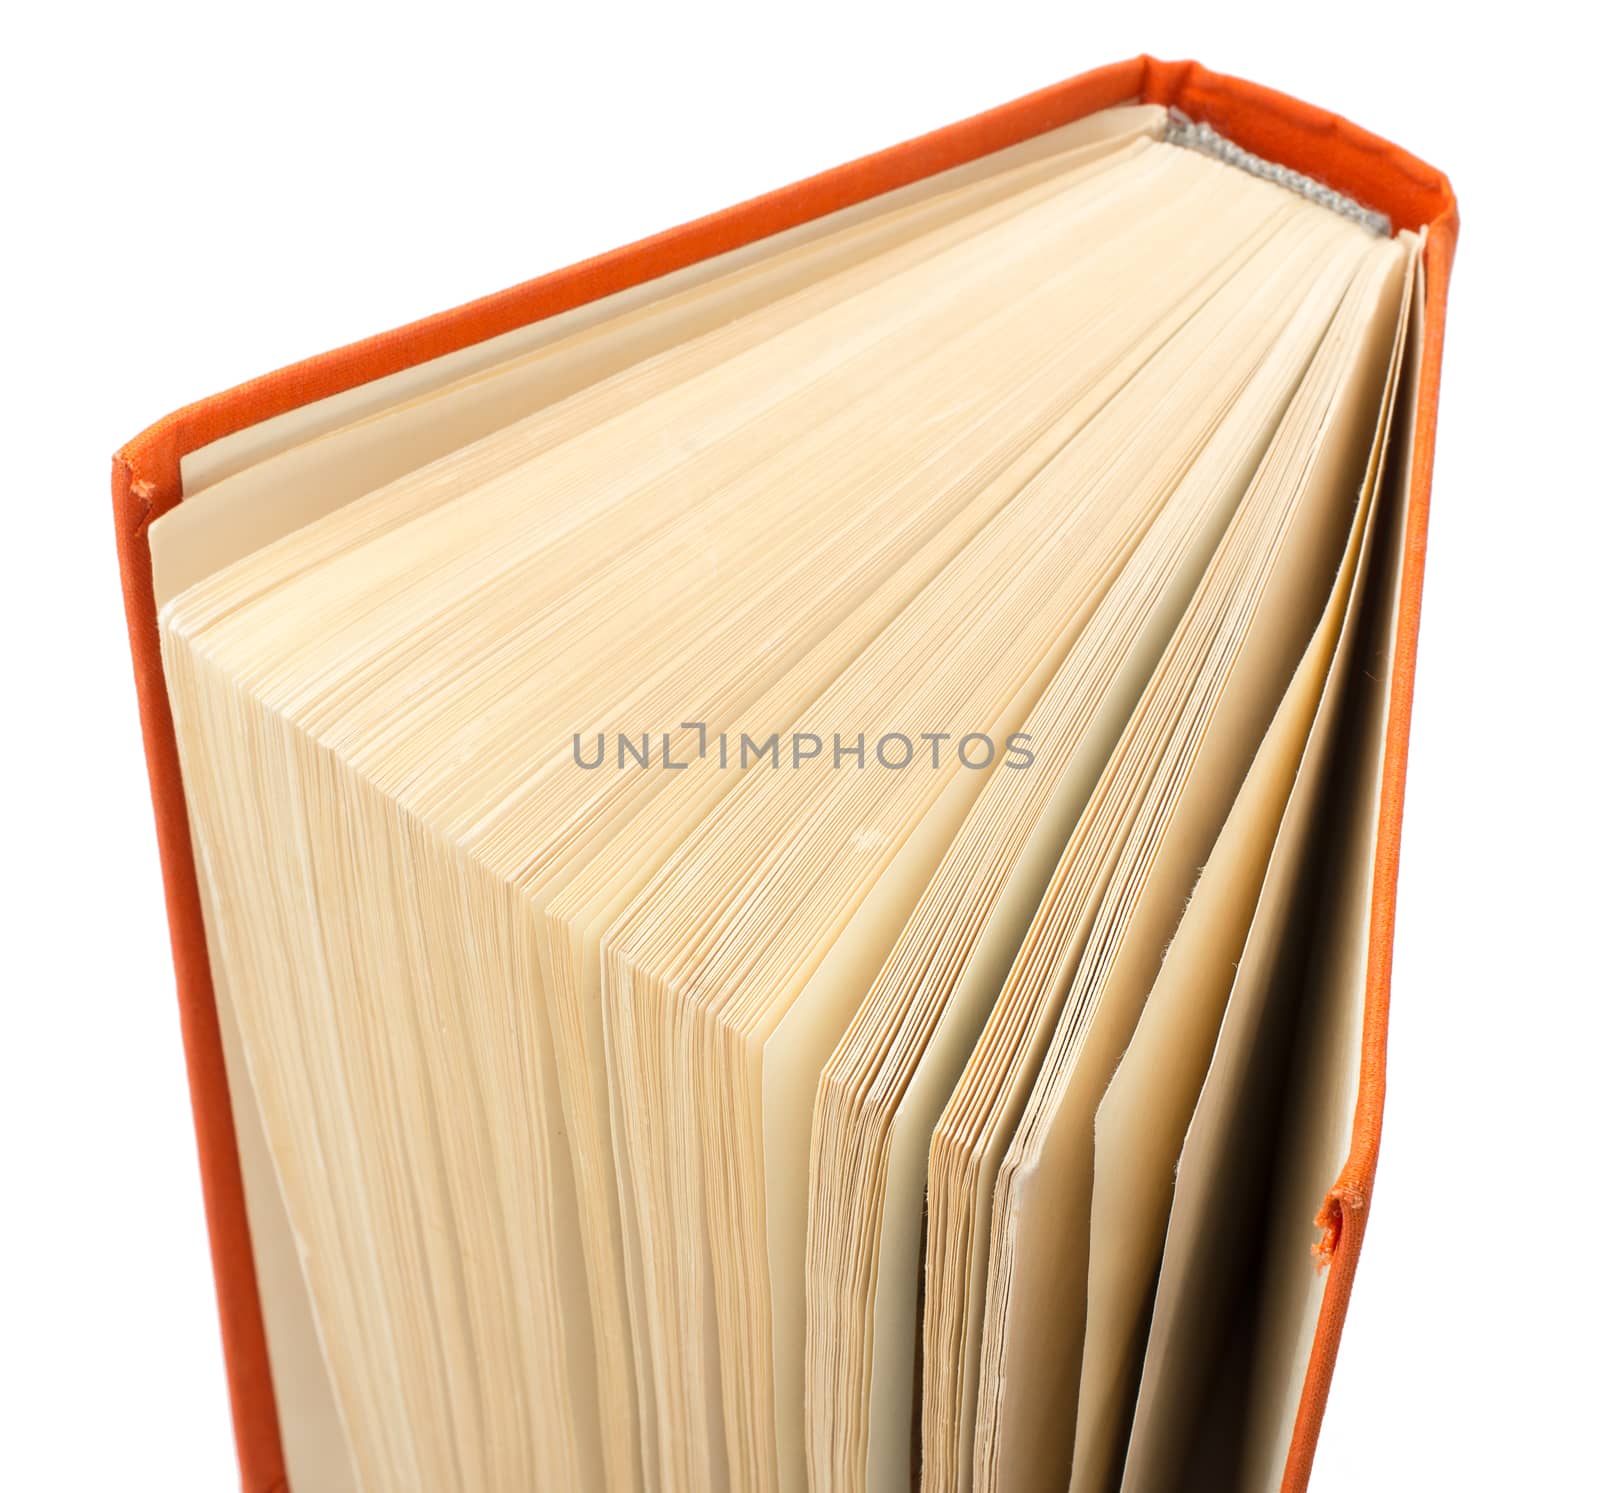 Orange book isolated on white background, close up view